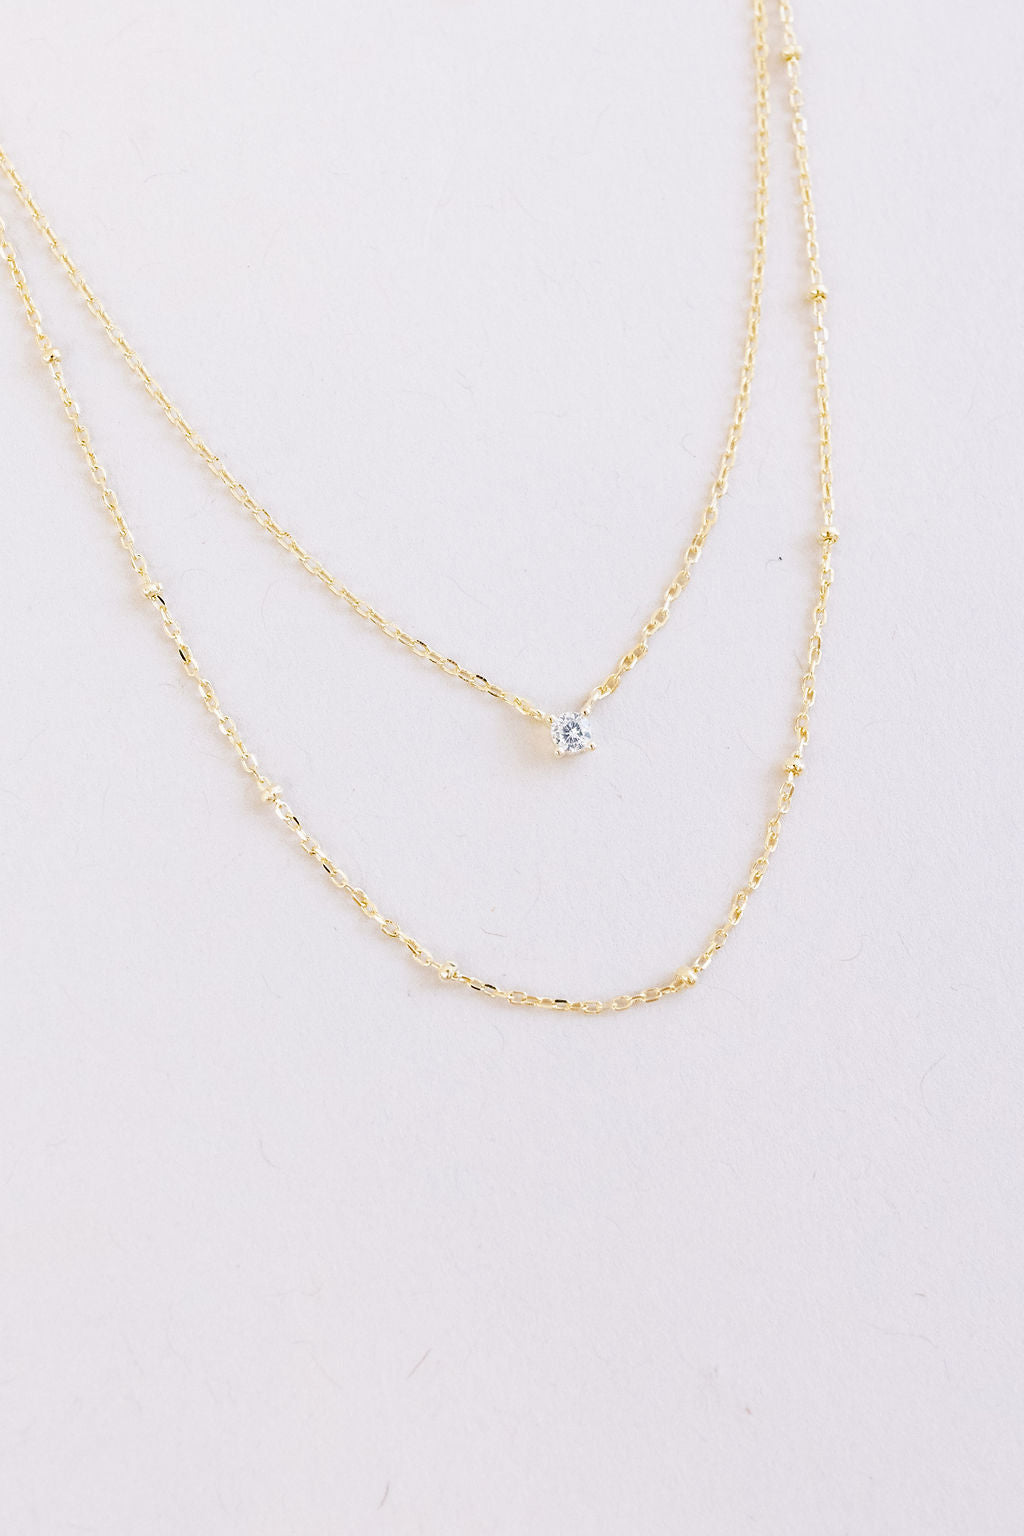 Mandy Gold Crystal Necklace - Poppy and Stella